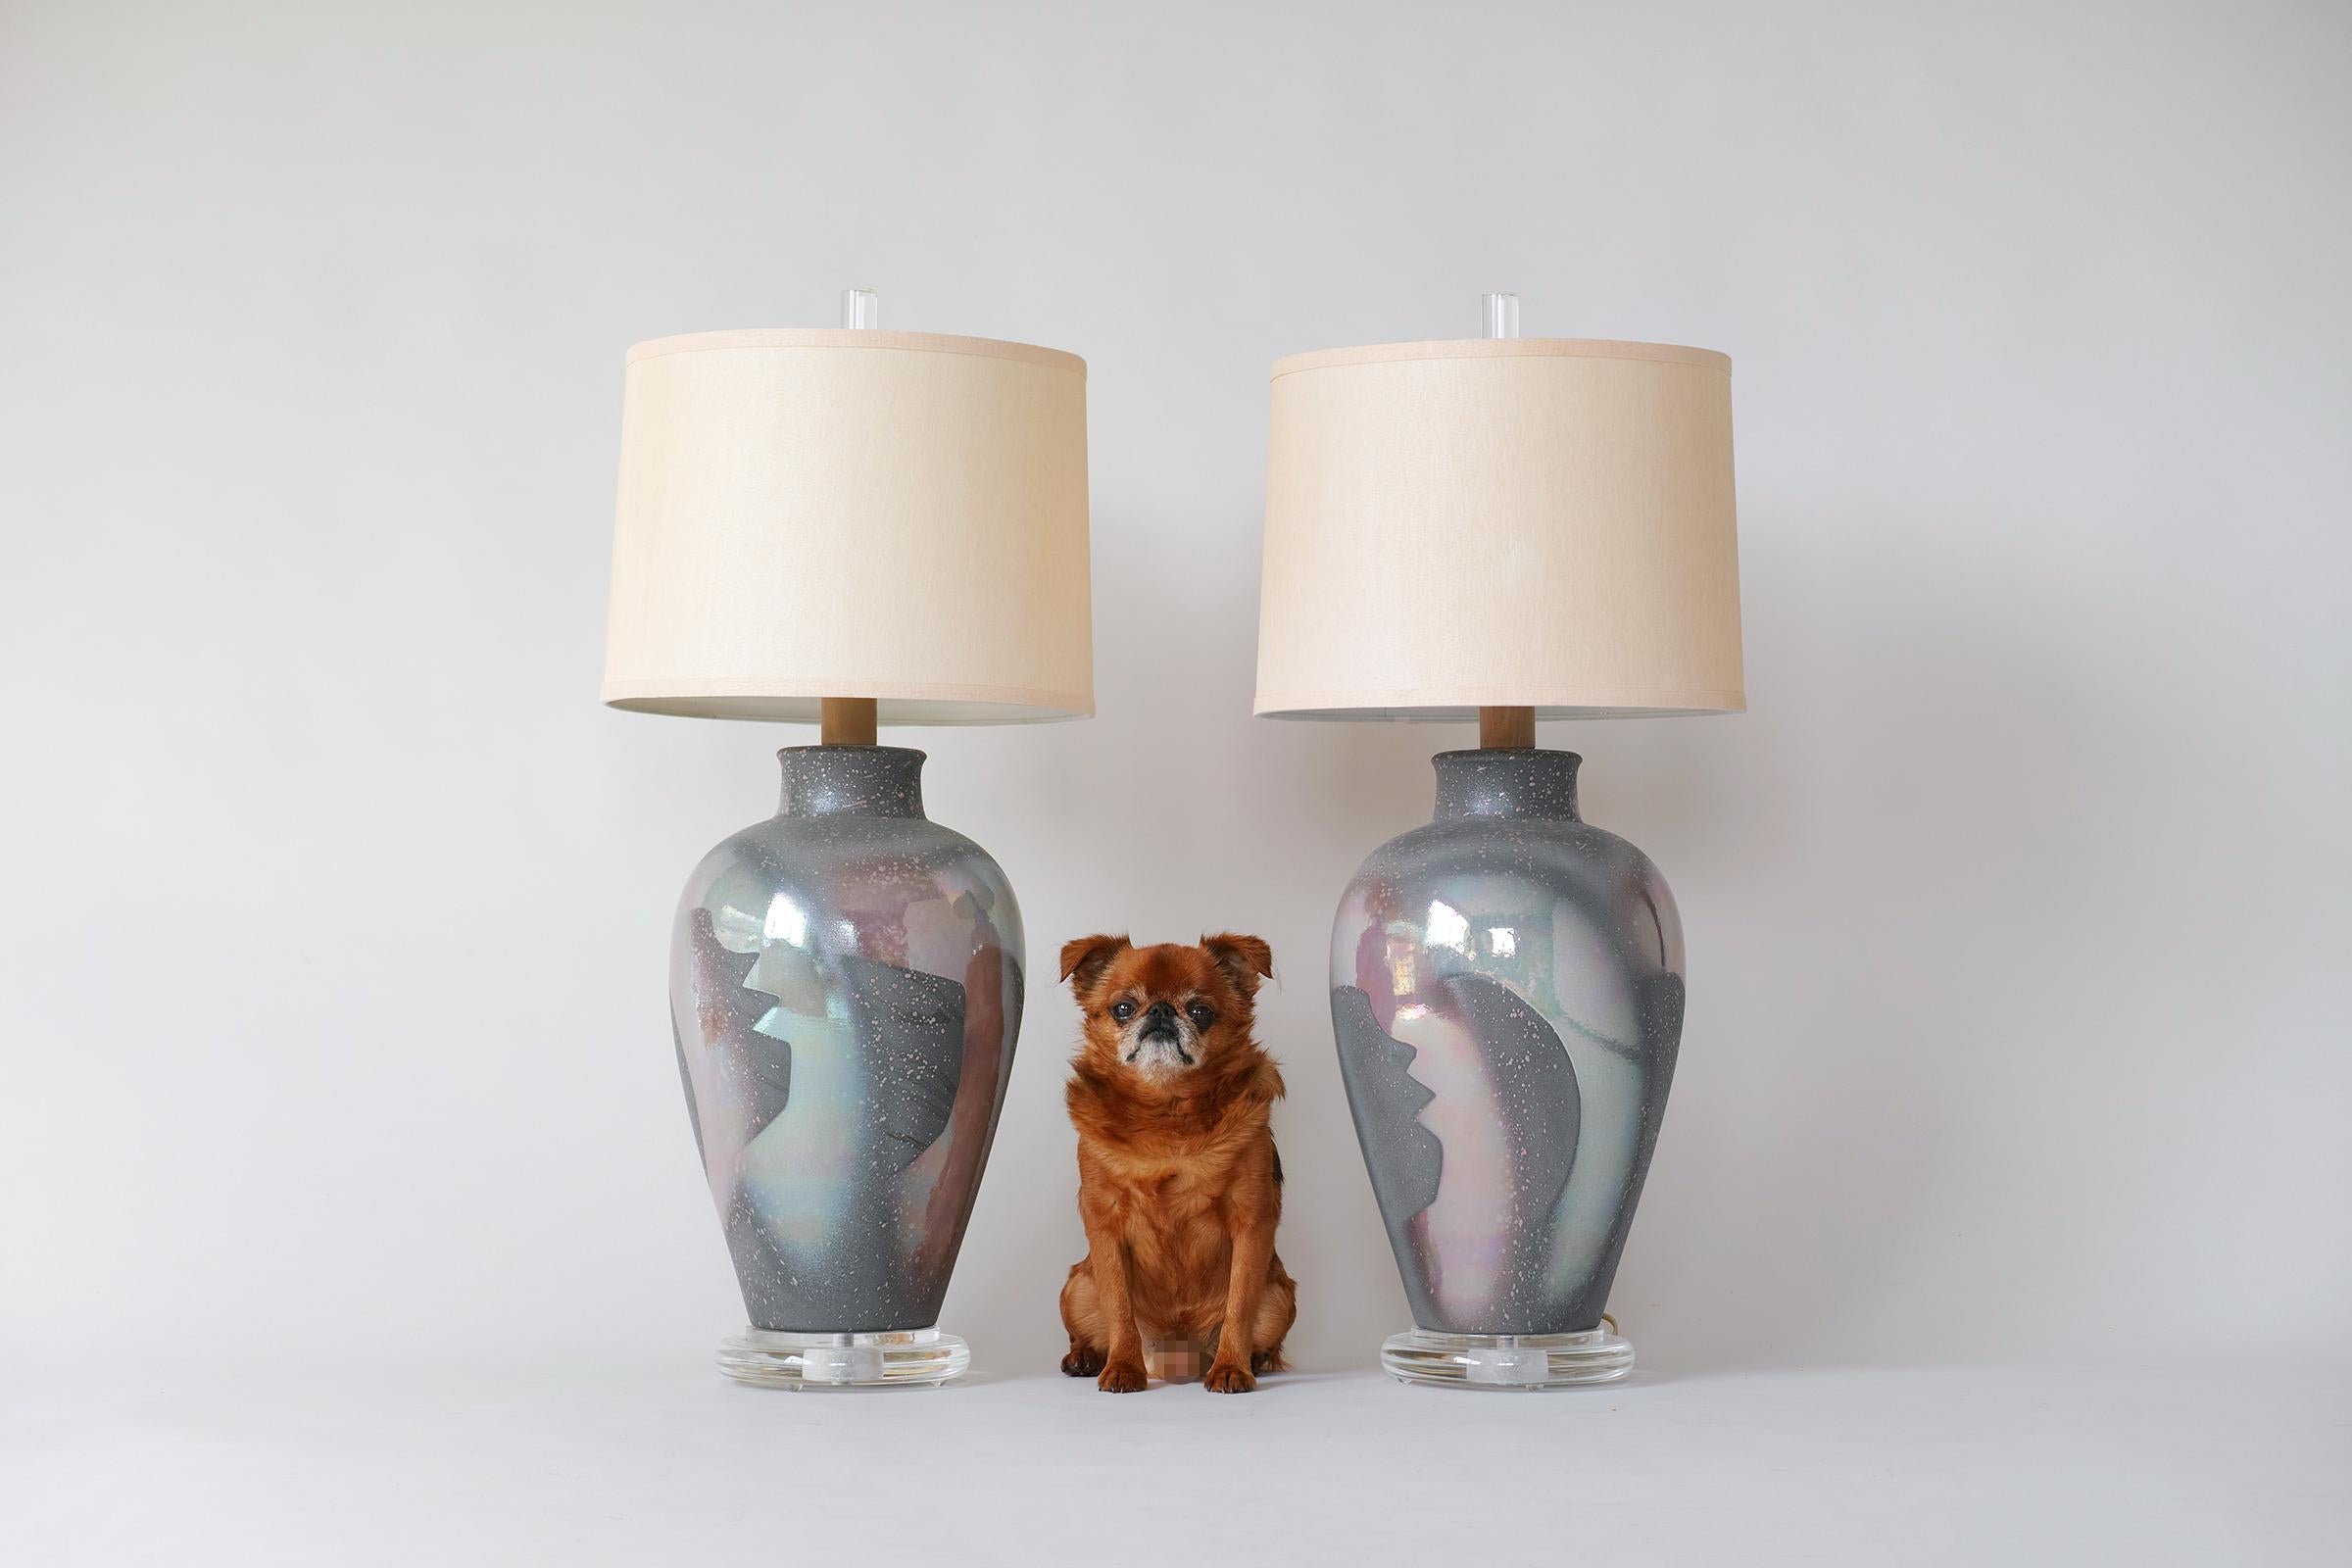 For your consideration is this fine pair of 1980s hand-glazed ceramic lamps by Casual Lamps of California. The ceramic bases are in great condition and feature a matte gray base glaze over which is an iridescent splatter & stencil in muted